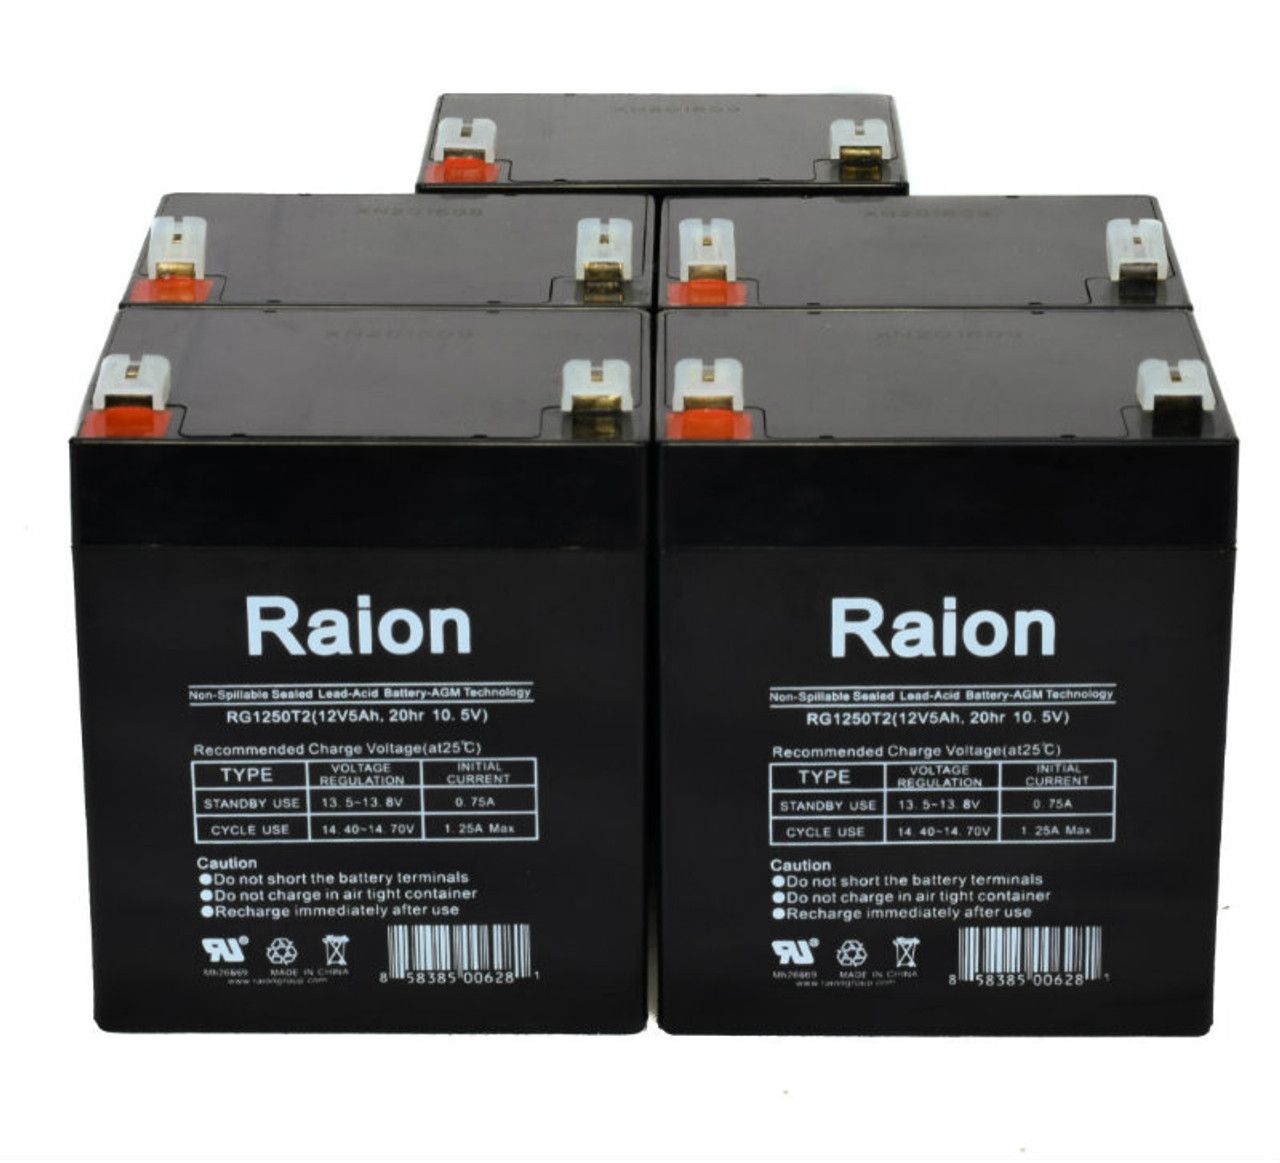 Raion Power 12V 5Ah RG1250T2 Replacement Lead Acid Battery for Valen Topin 12 TP 5 - 5 Pack